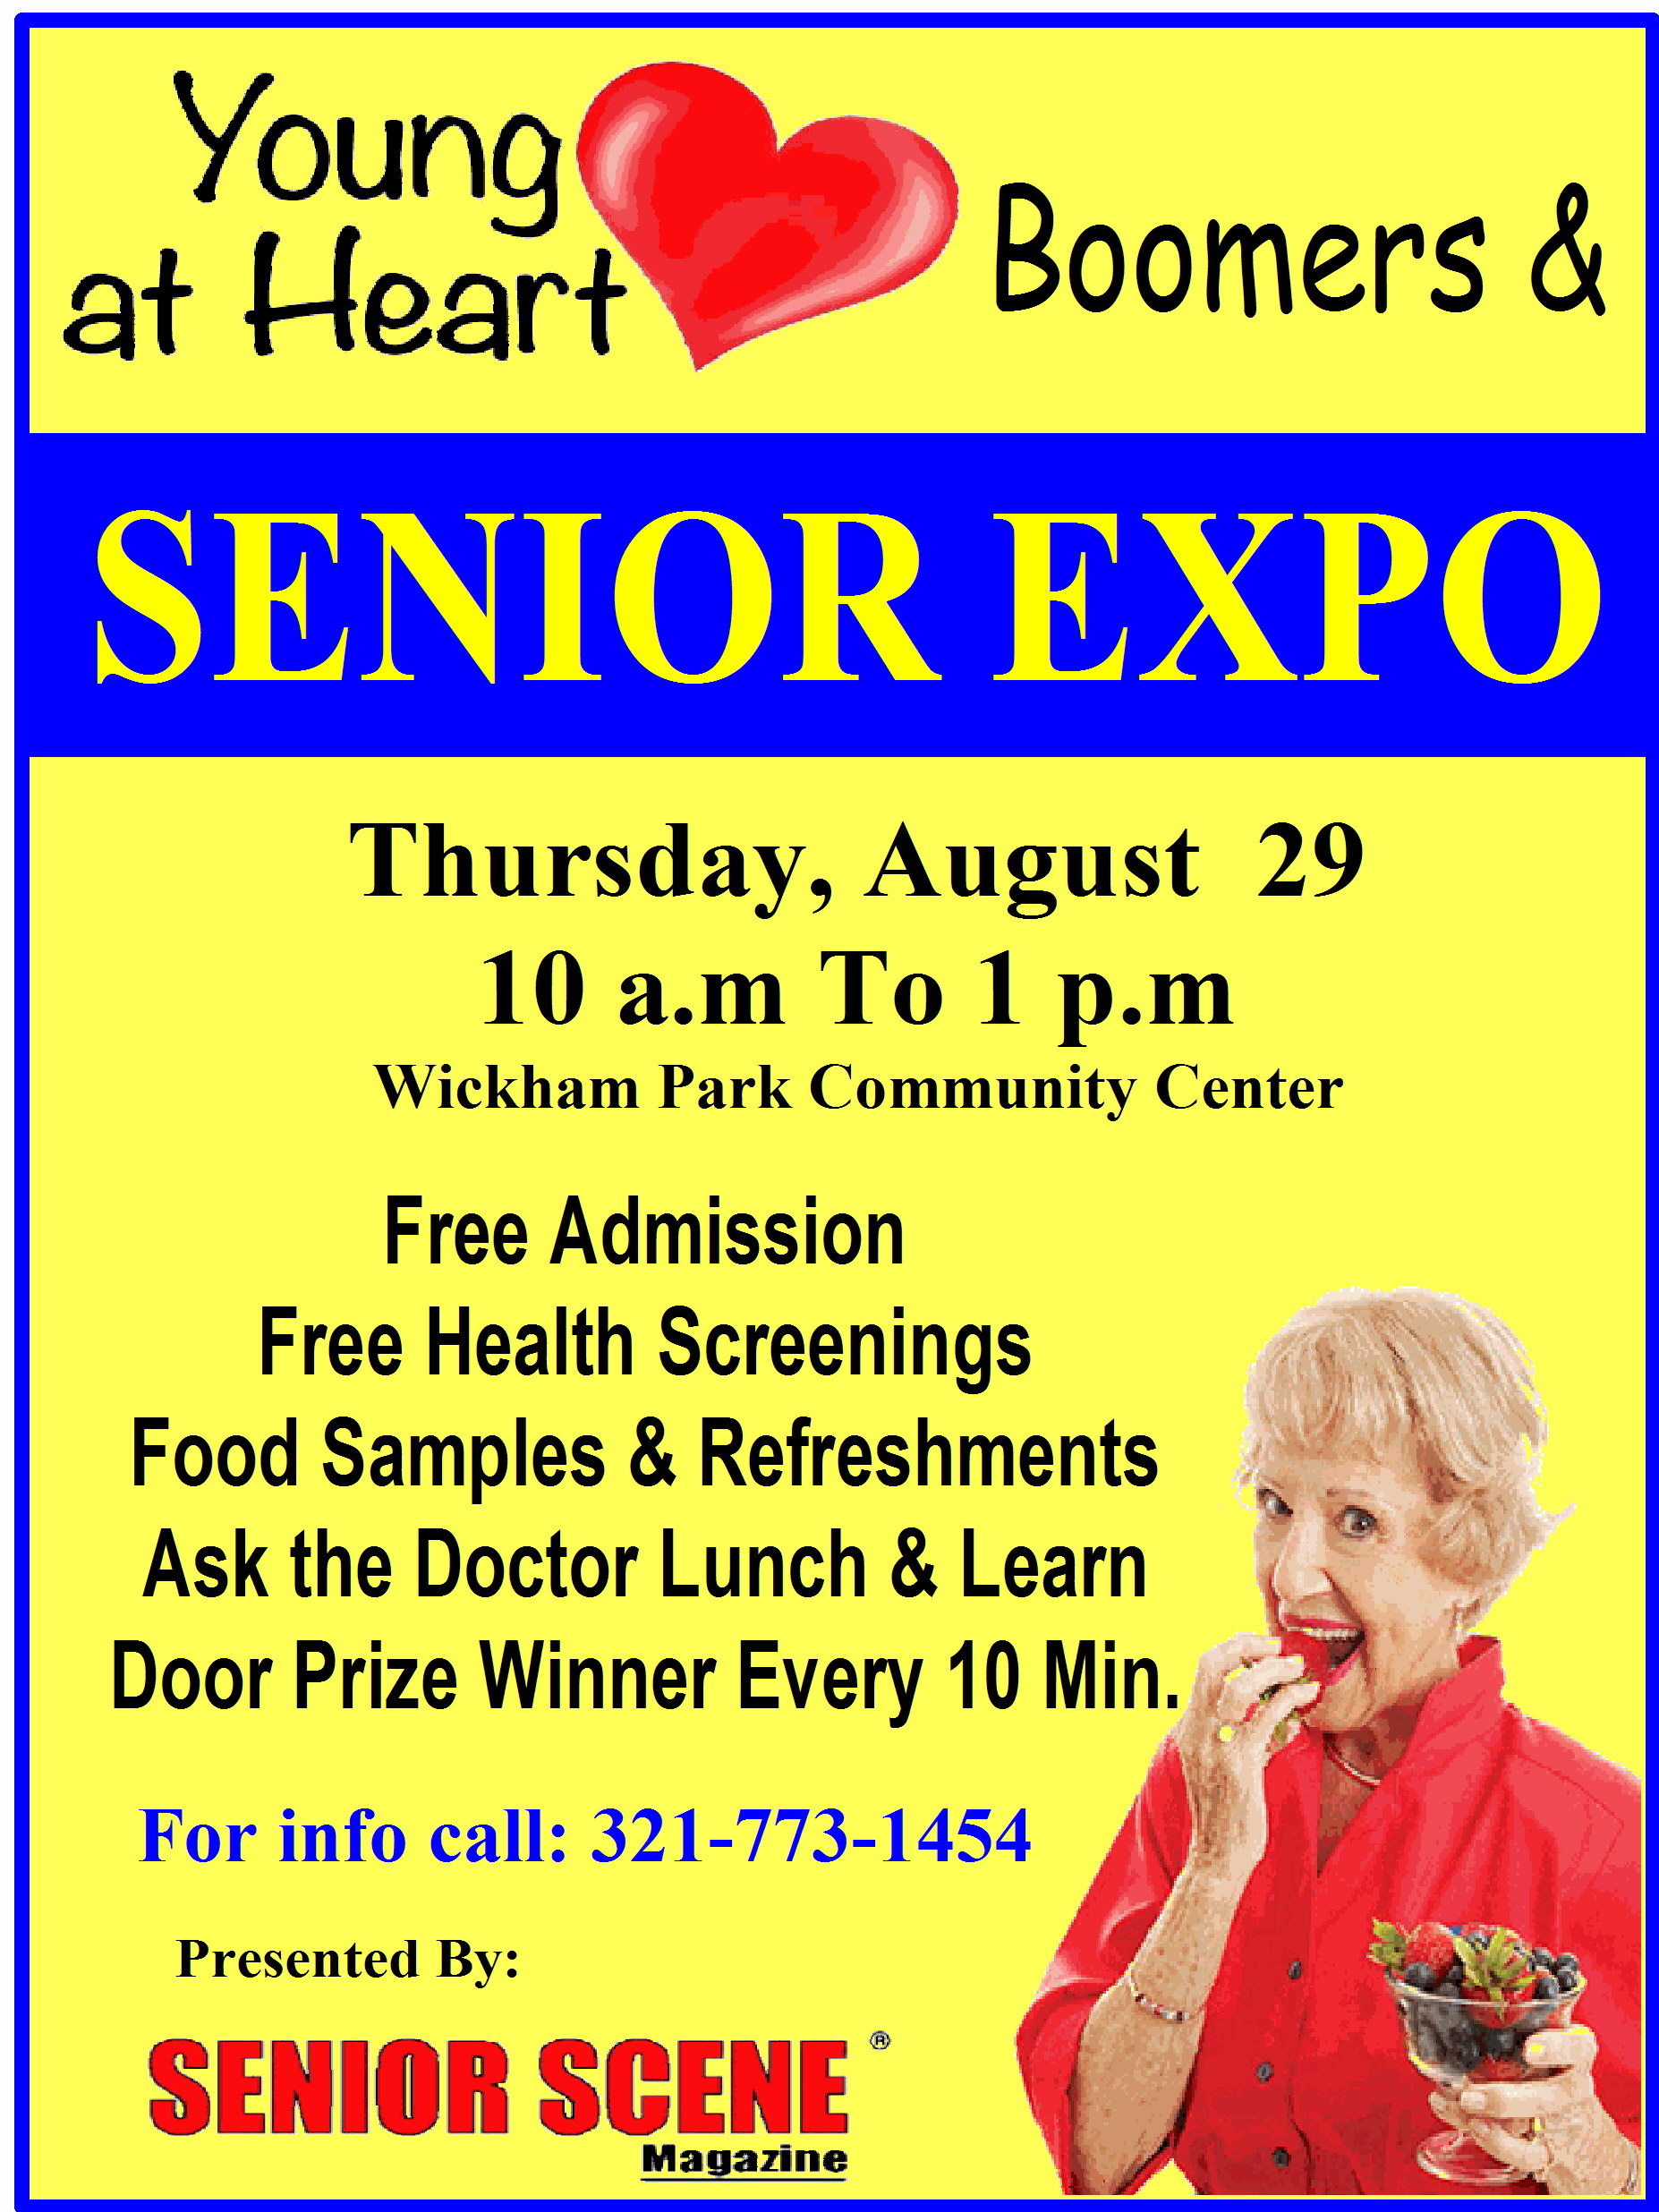 Young at Heart Boomers & Senior Expo presented by Senior Scene Magazine